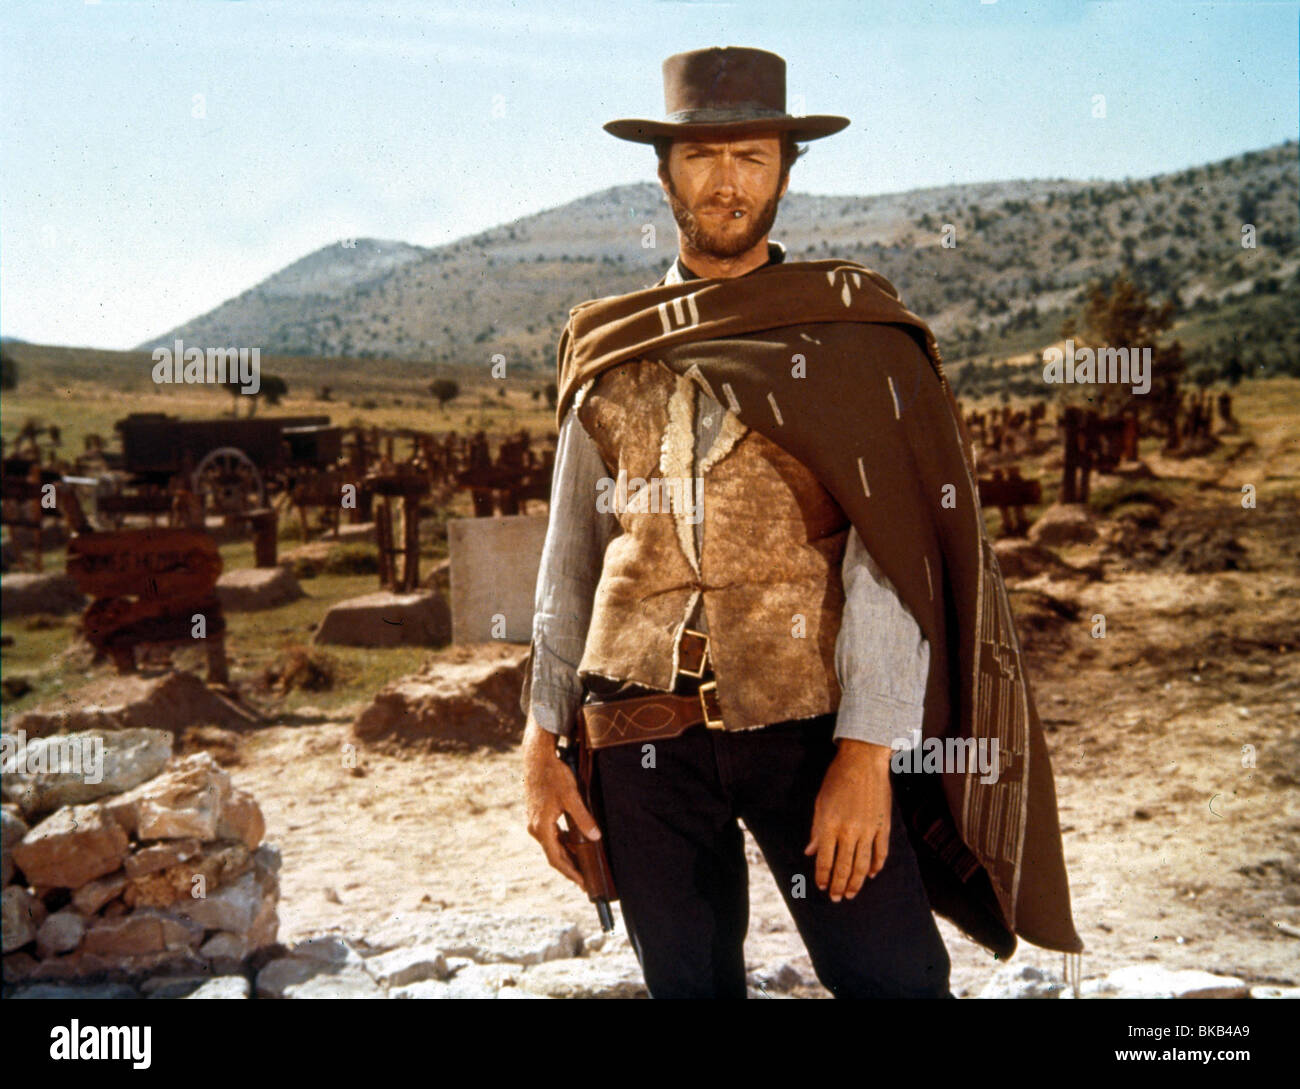 THE GOOD, THE BAD AND THE UGLY (1967) CLINT EASTWOOD GBU 029 Stock Photo